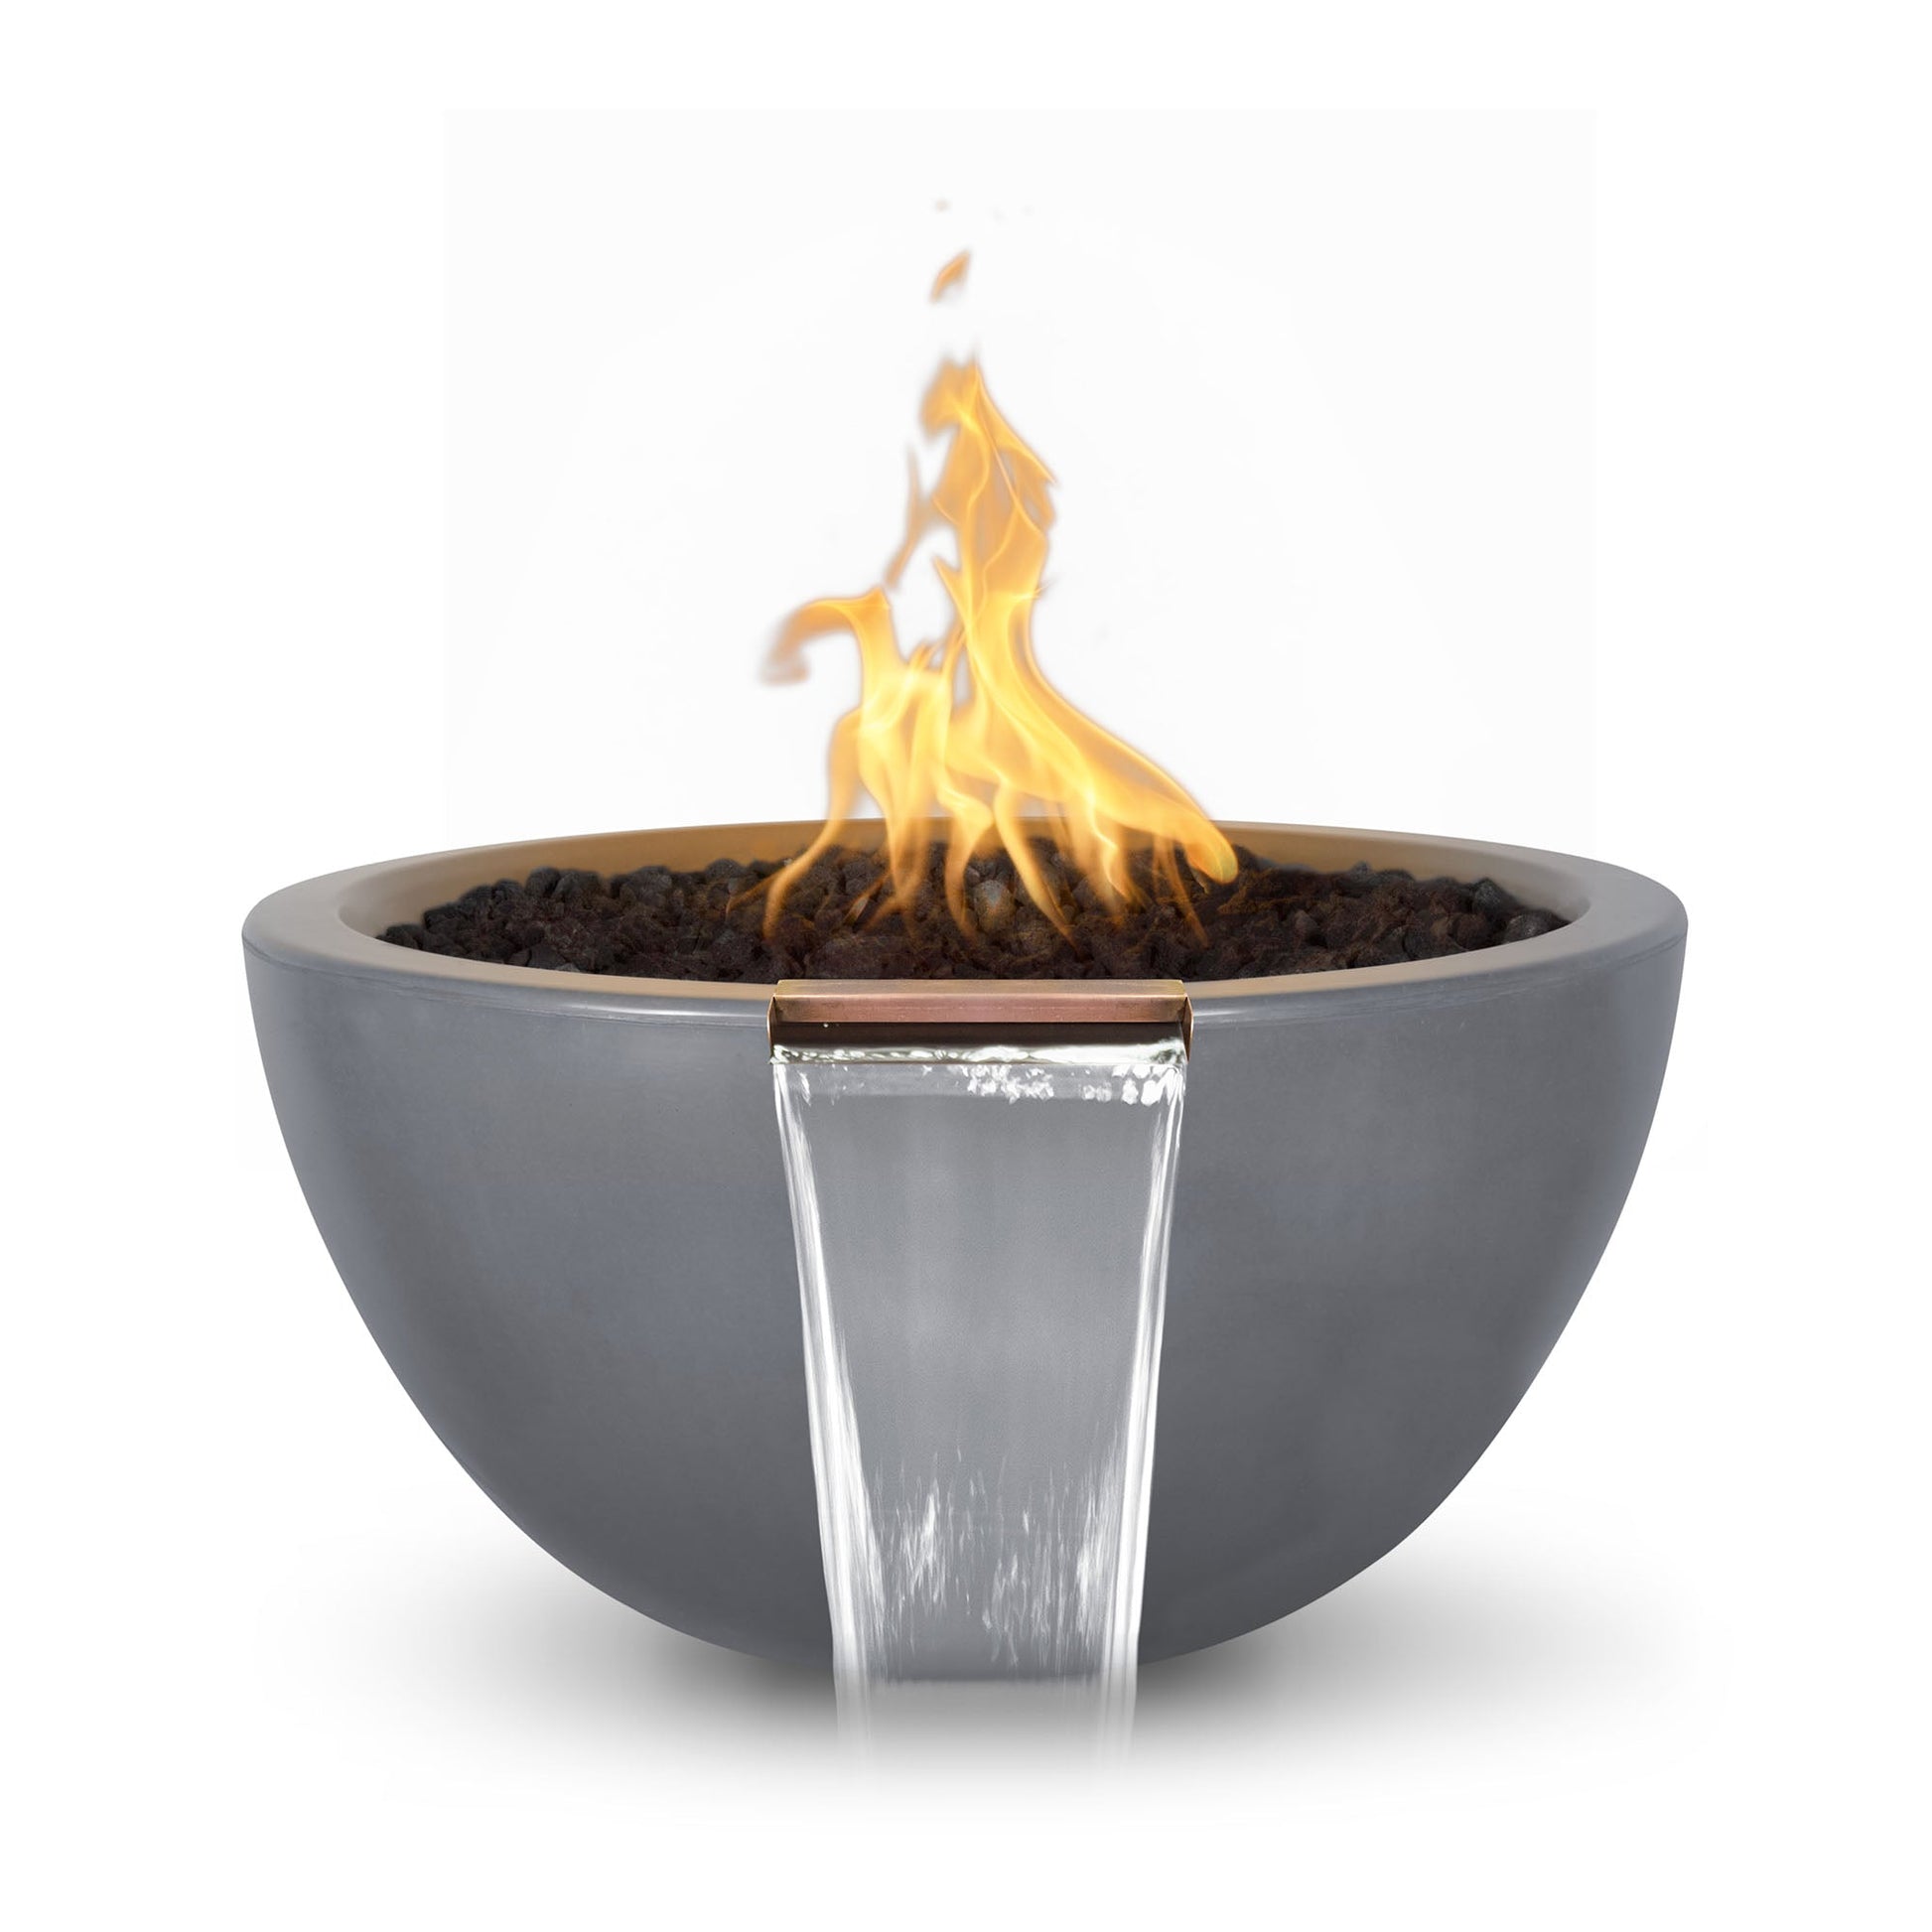 The Outdoor Plus Round Luna 30" Brown GFRC Concrete Liquid Propane Fire & Water Bowl with Match Lit with Flame Sense Ignition